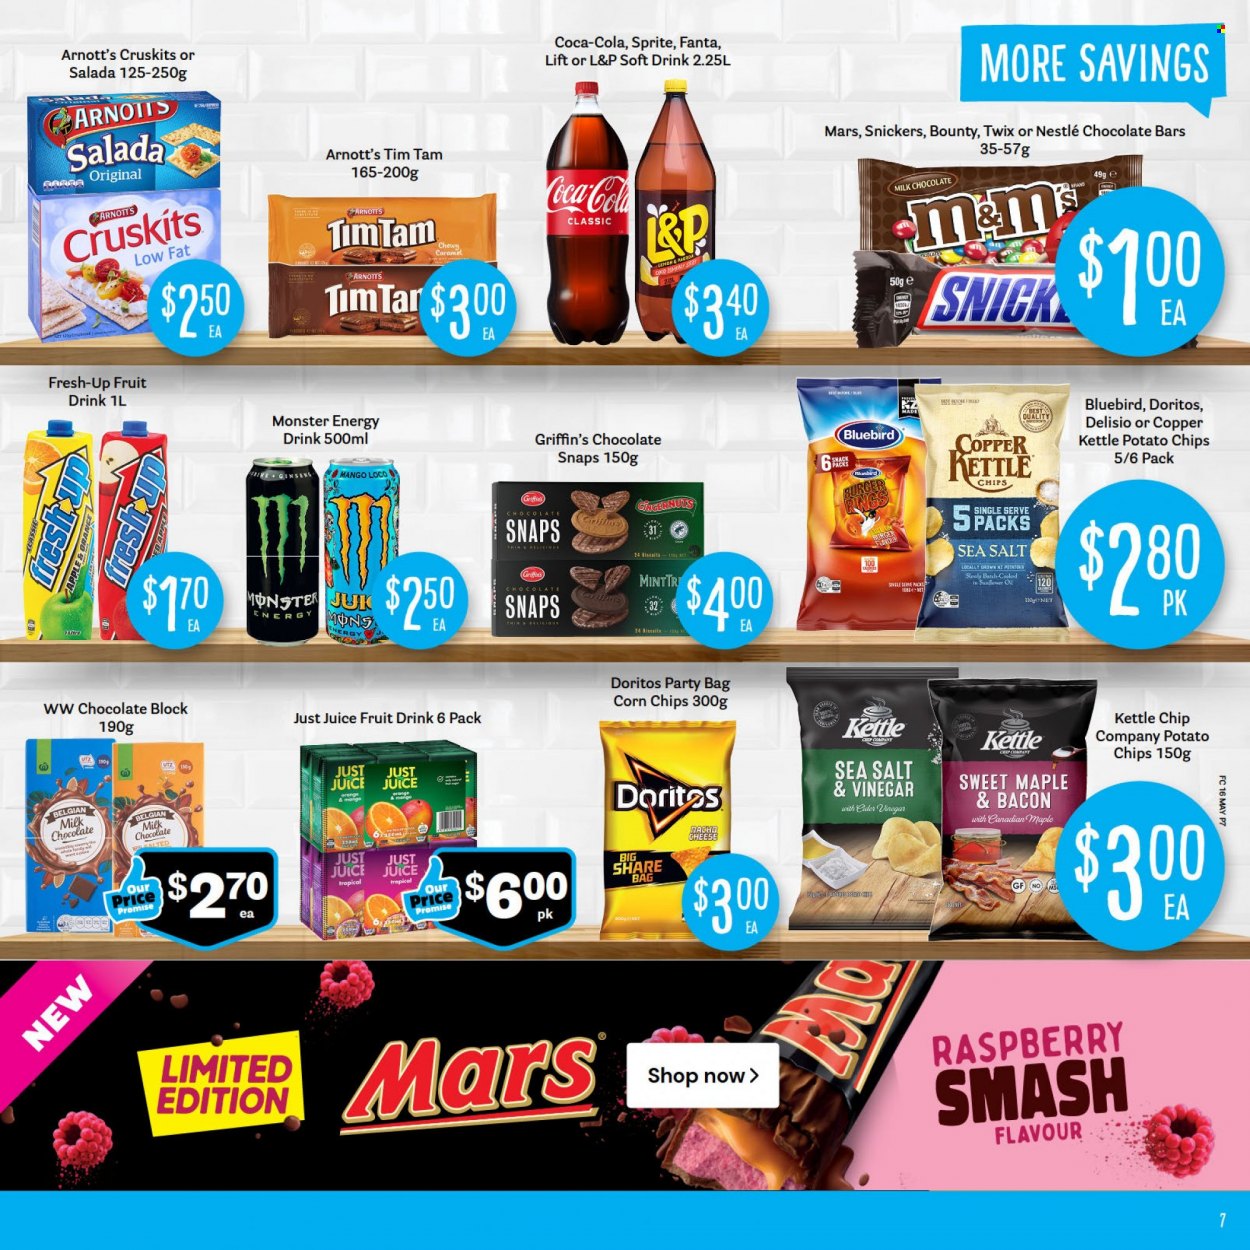 thumbnail - Fresh Choice mailer - 16.05.2022 - 22.05.2022 - Sales products - mango, bacon, milk chocolate, Nestlé, Snickers, Twix, Bounty, Mars, Tim Tam, Griffin's, chocolate bar, Doritos, potato chips, chips, corn chips, Bluebird, Delisio, Copper Kettle, caramel, Coca-Cola, Sprite, juice, energy drink, Monster, Fanta, fruit drink, soft drink, L&P, Monster Energy, cider. Page 7.